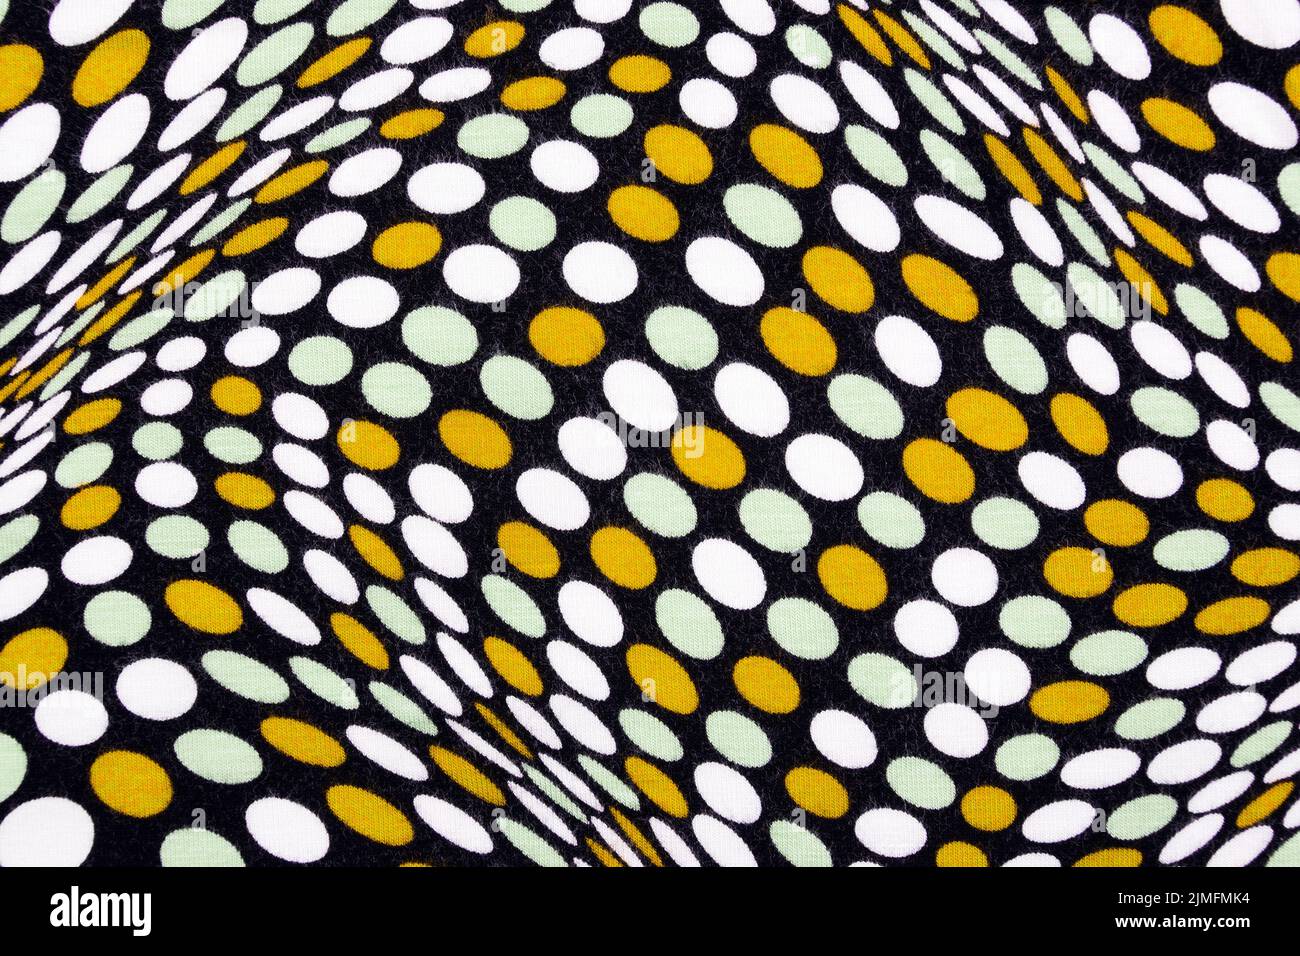 White material in yellow and white dots, a background or texture Stock Photo